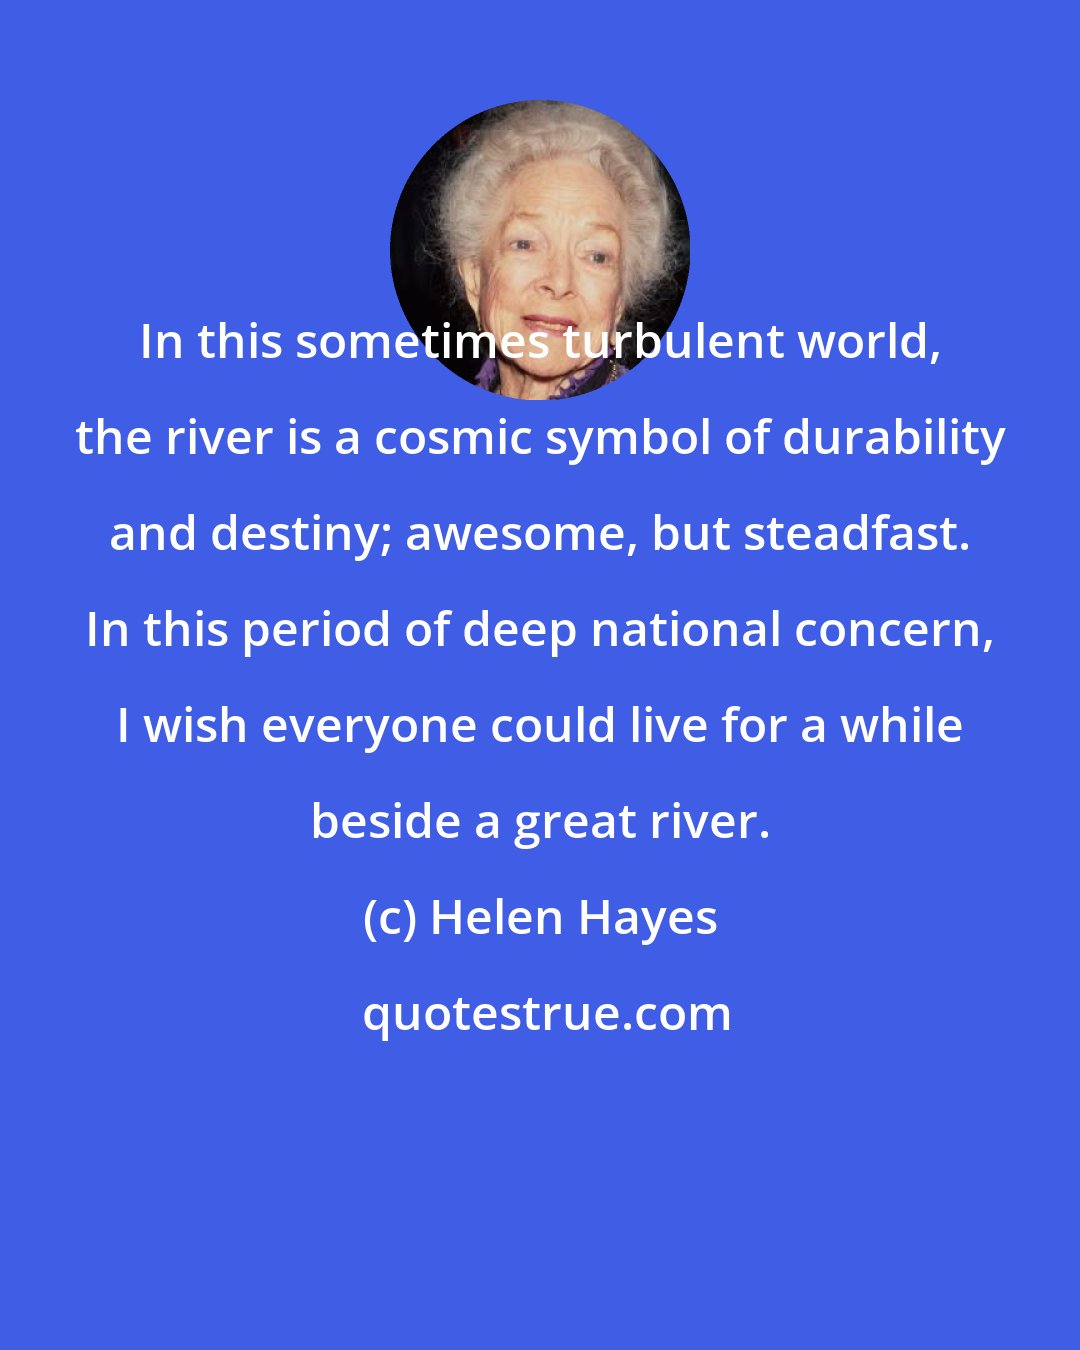 Helen Hayes: In this sometimes turbulent world, the river is a cosmic symbol of durability and destiny; awesome, but steadfast. In this period of deep national concern, I wish everyone could live for a while beside a great river.